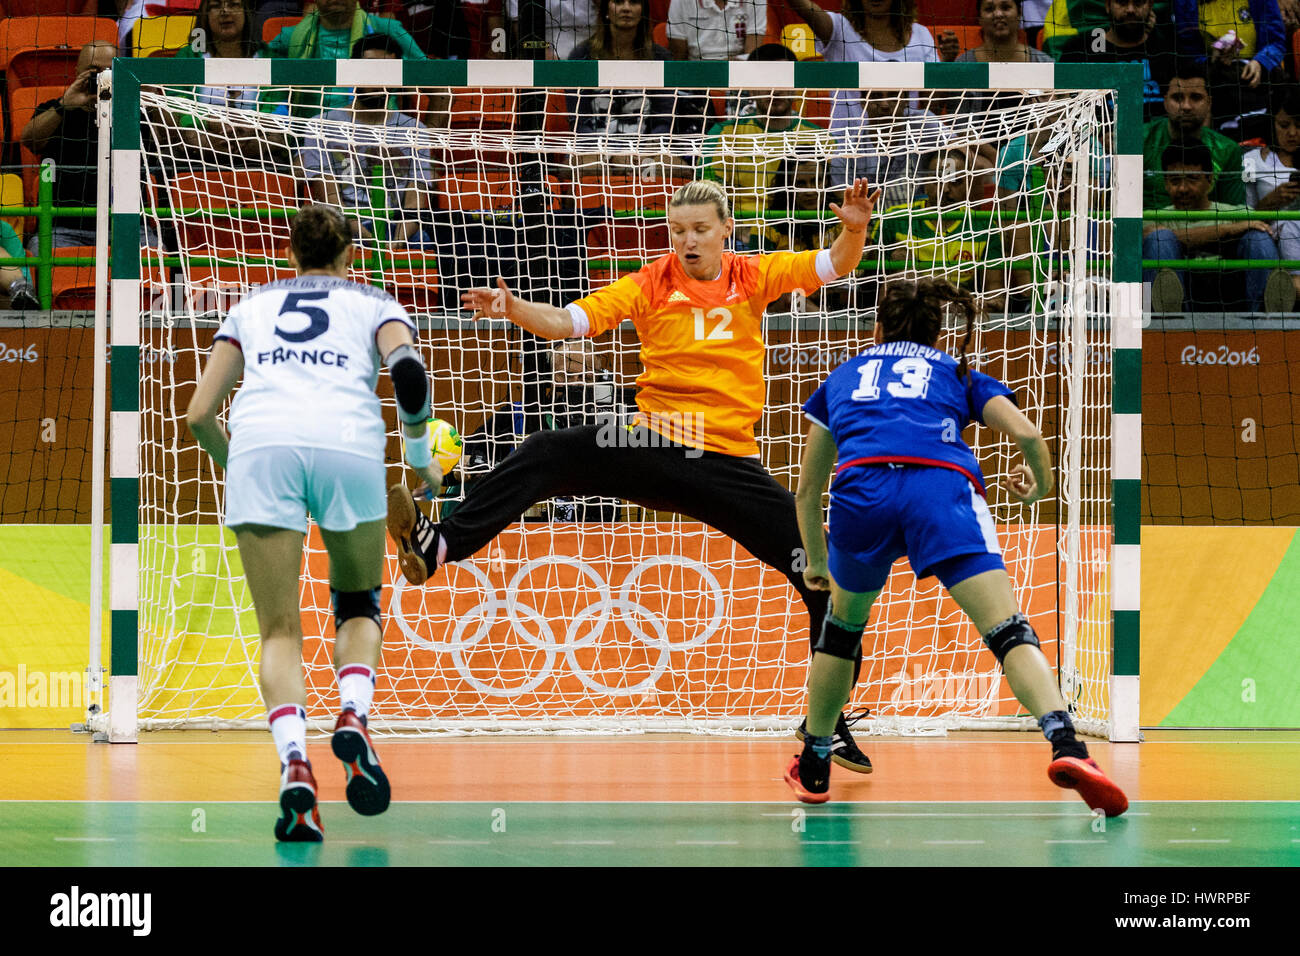 Rio de Janeiro, Brazil. 20 August 2016 Amandine Leynaud (FRA) goalie competes in the women's handball gold medal match Russia vs. France at the 2016 O Stock Photo